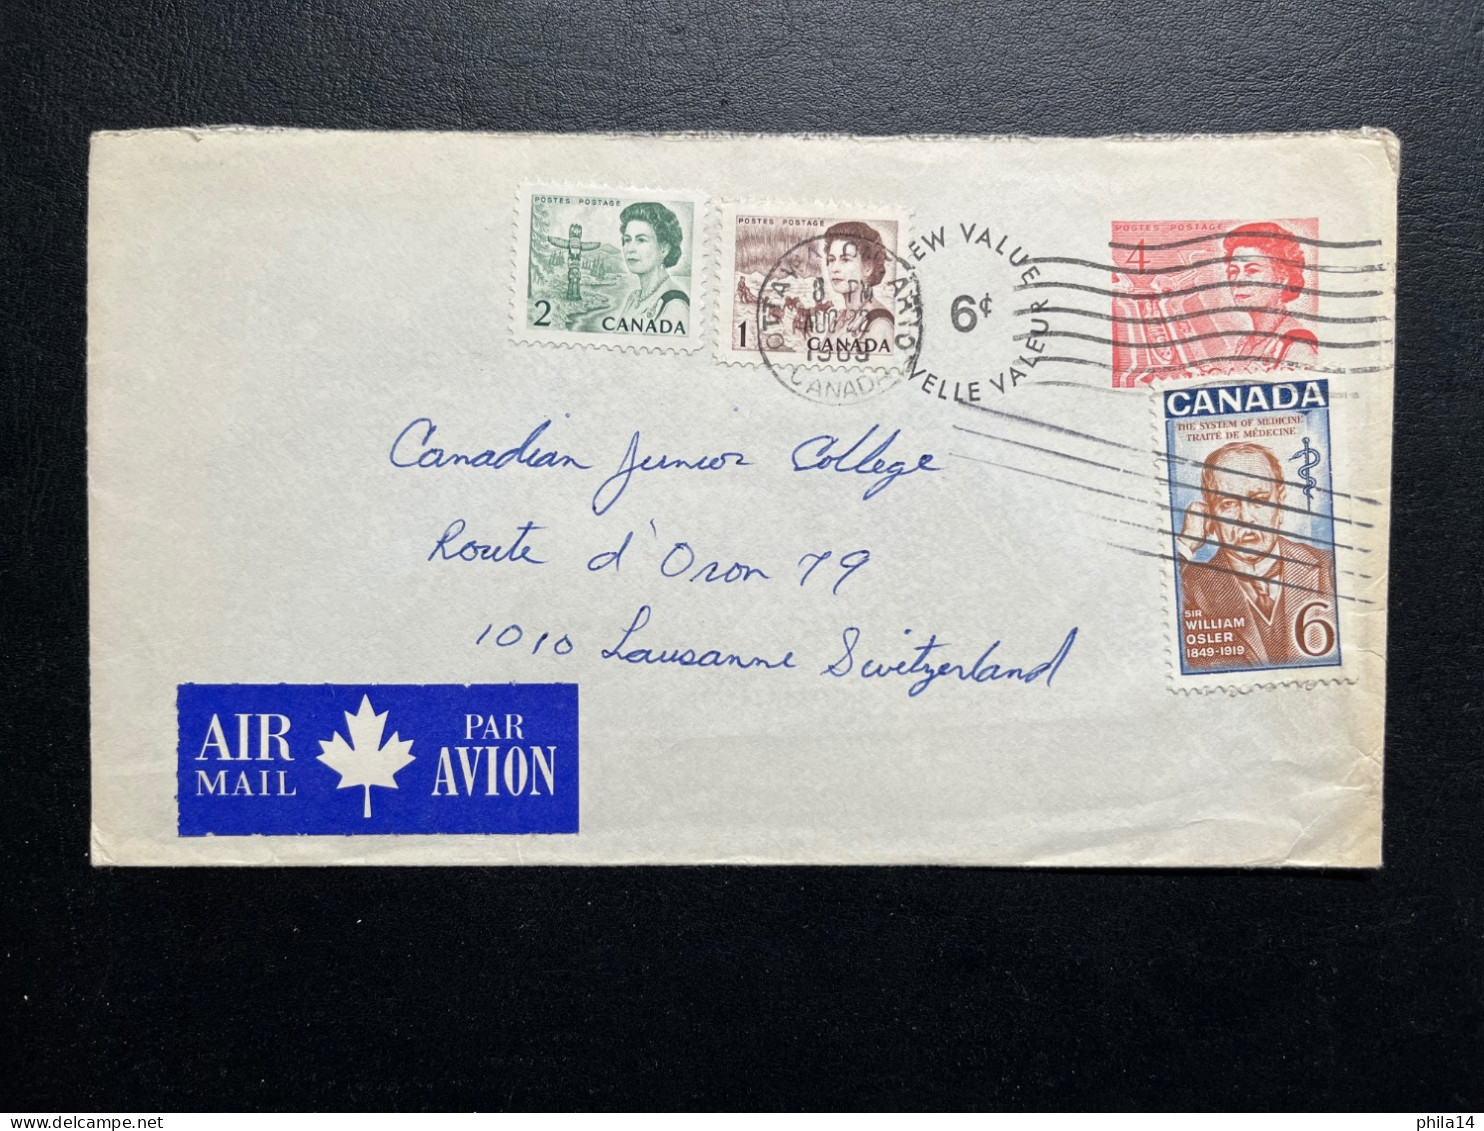 ENVELOPPE CANADA OTTAWA ONTARIO 1969 POUR LAUSANNE SUISSE - Covers & Documents